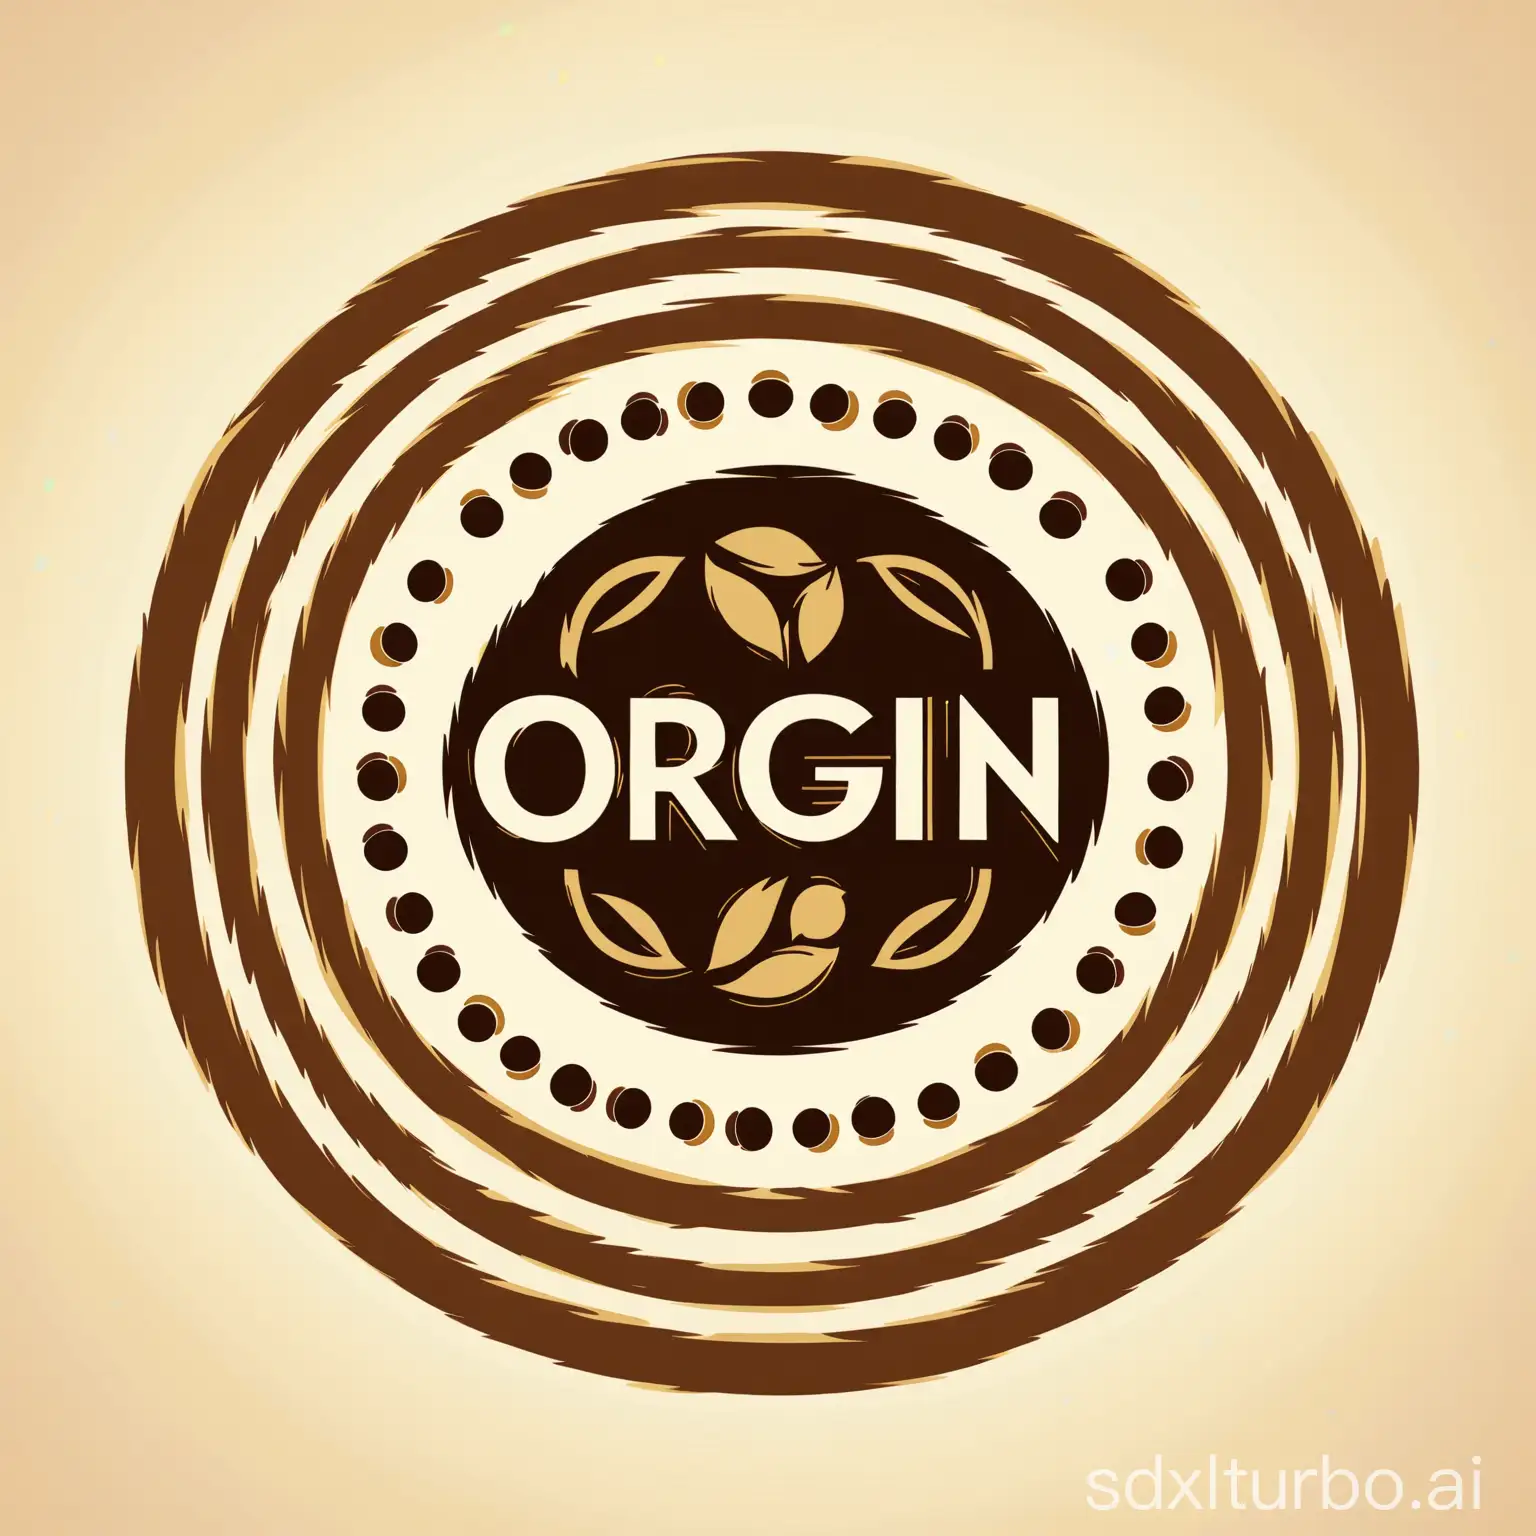 Global-Perspective-Coffee-Brand-Logo-Earthy-Coffee-Bean-Design-in-Dark-Brown-and-Gold